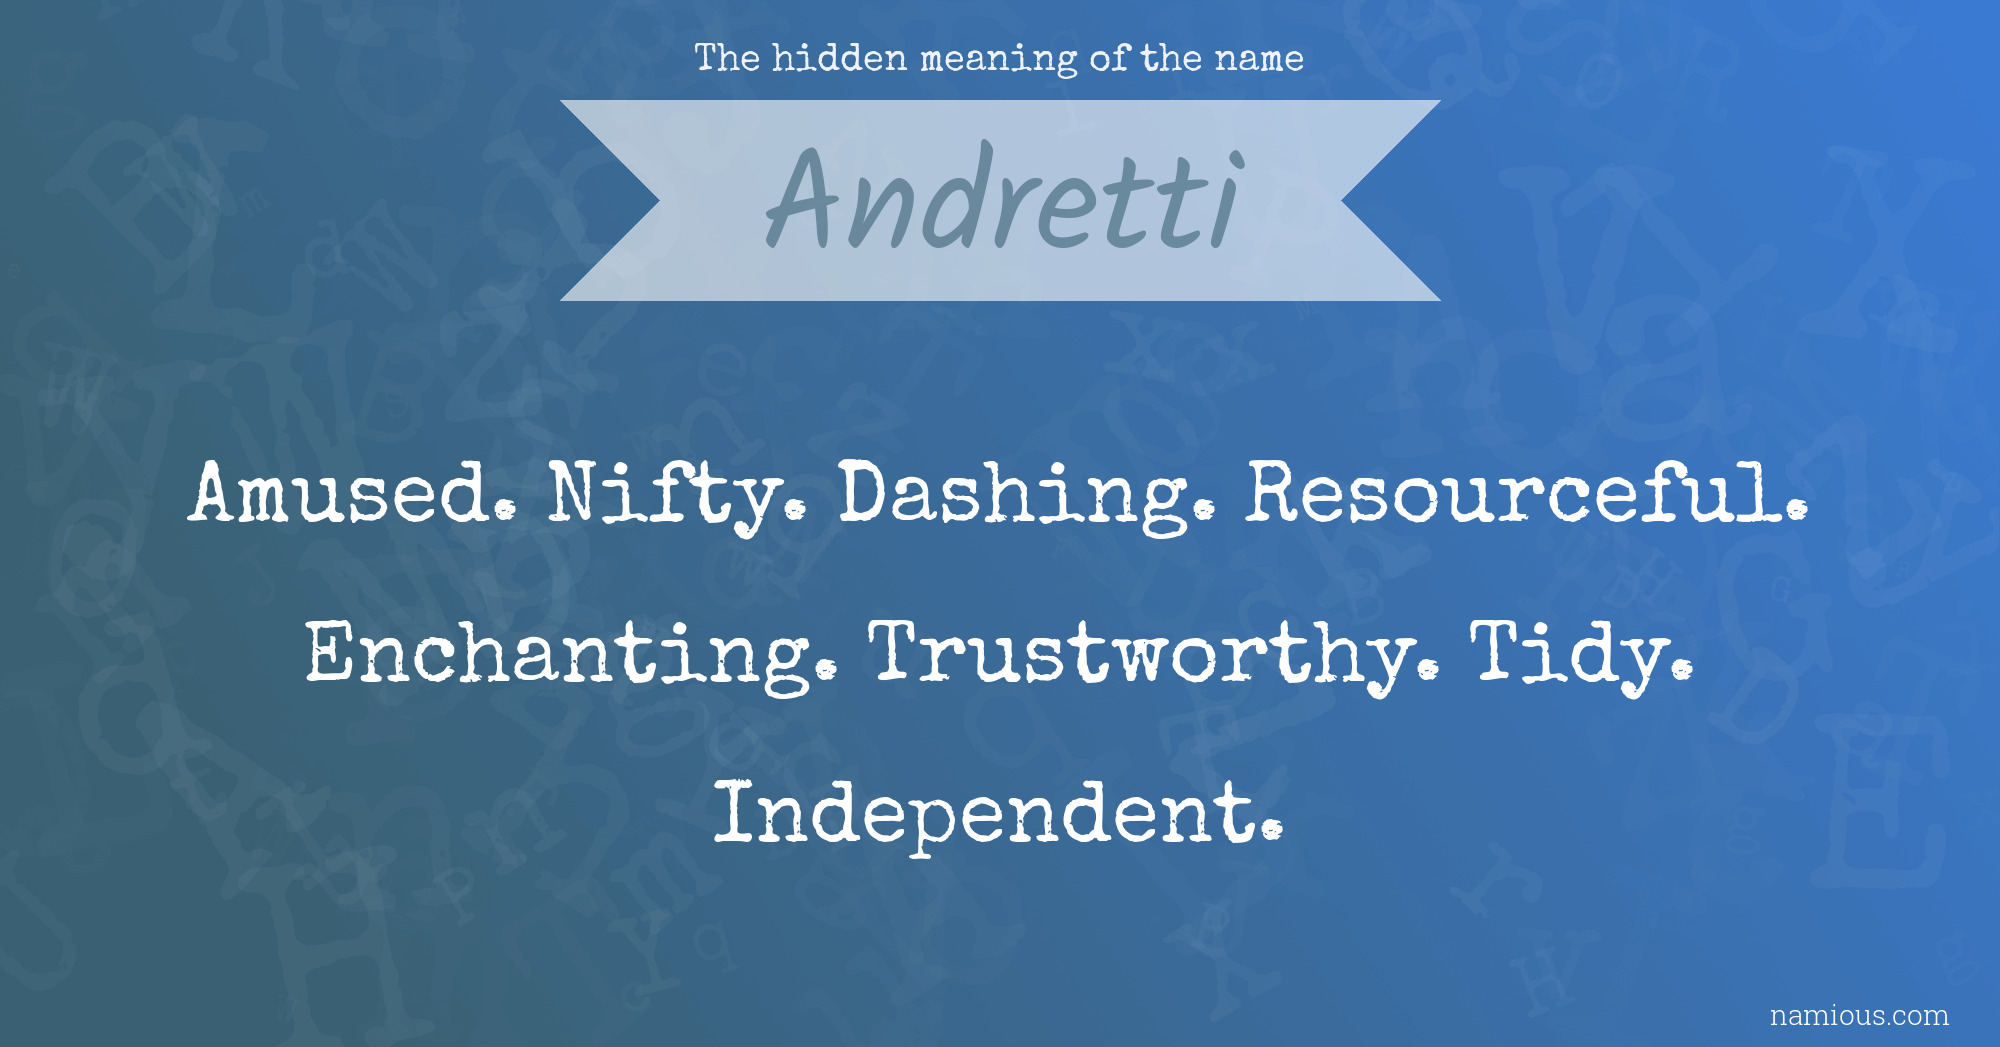 The hidden meaning of the name Andretti